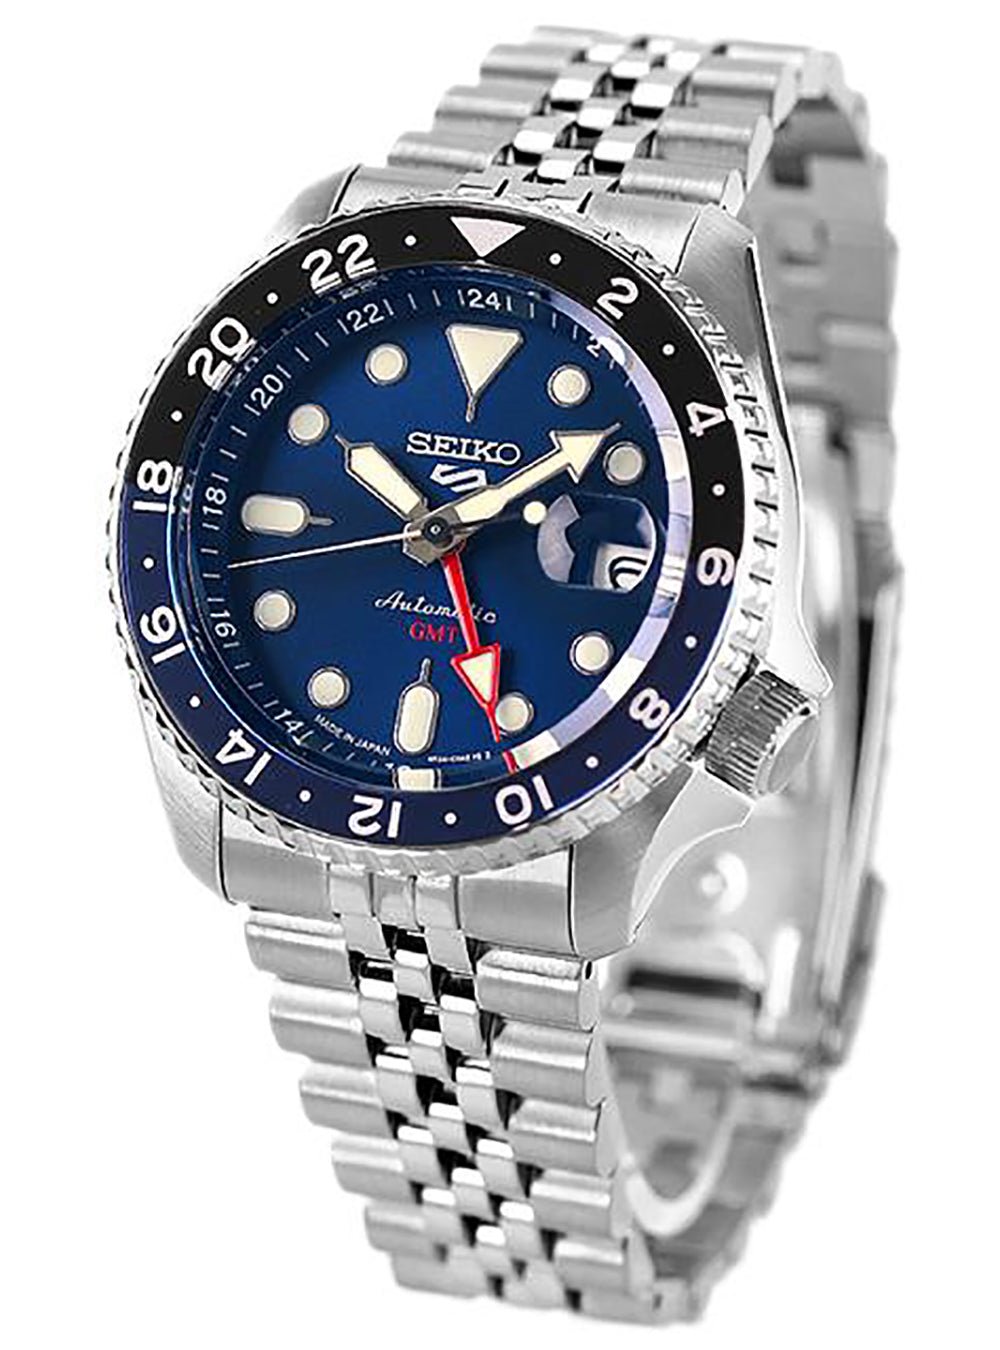 SEIKO 5 SPORTS SKX SPORTS STYLE GMT SBSC003 MADE IN JAPAN JDM